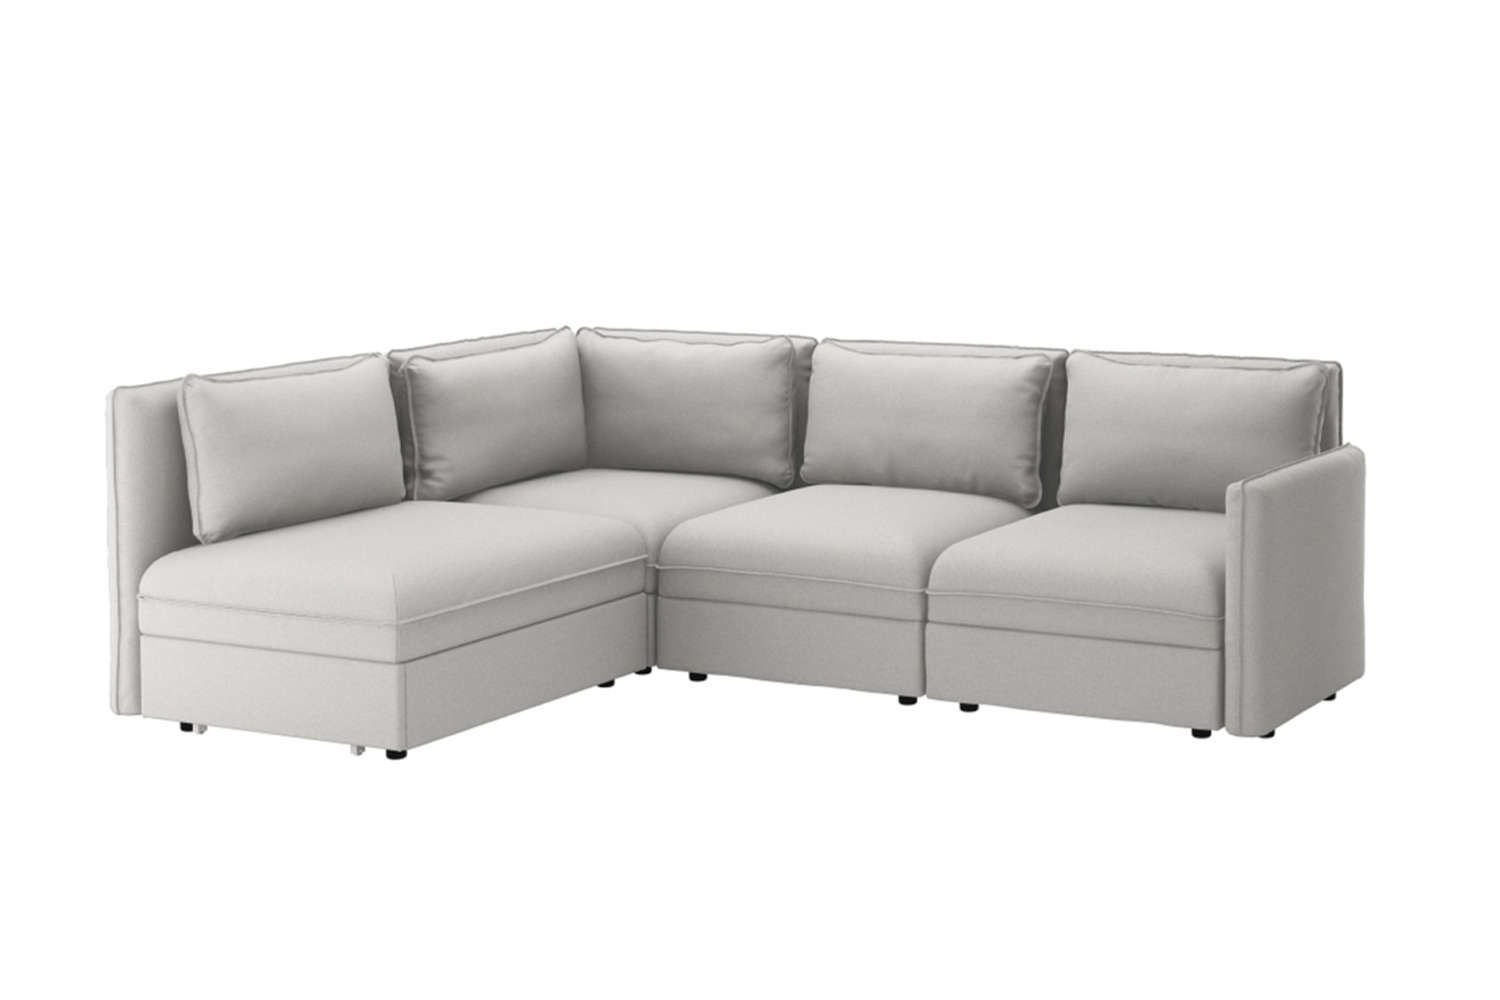 8 Favorites: Surprisingly Attractive Sofas With Storage Within Sofa Sectionals With Storage (View 12 of 15)